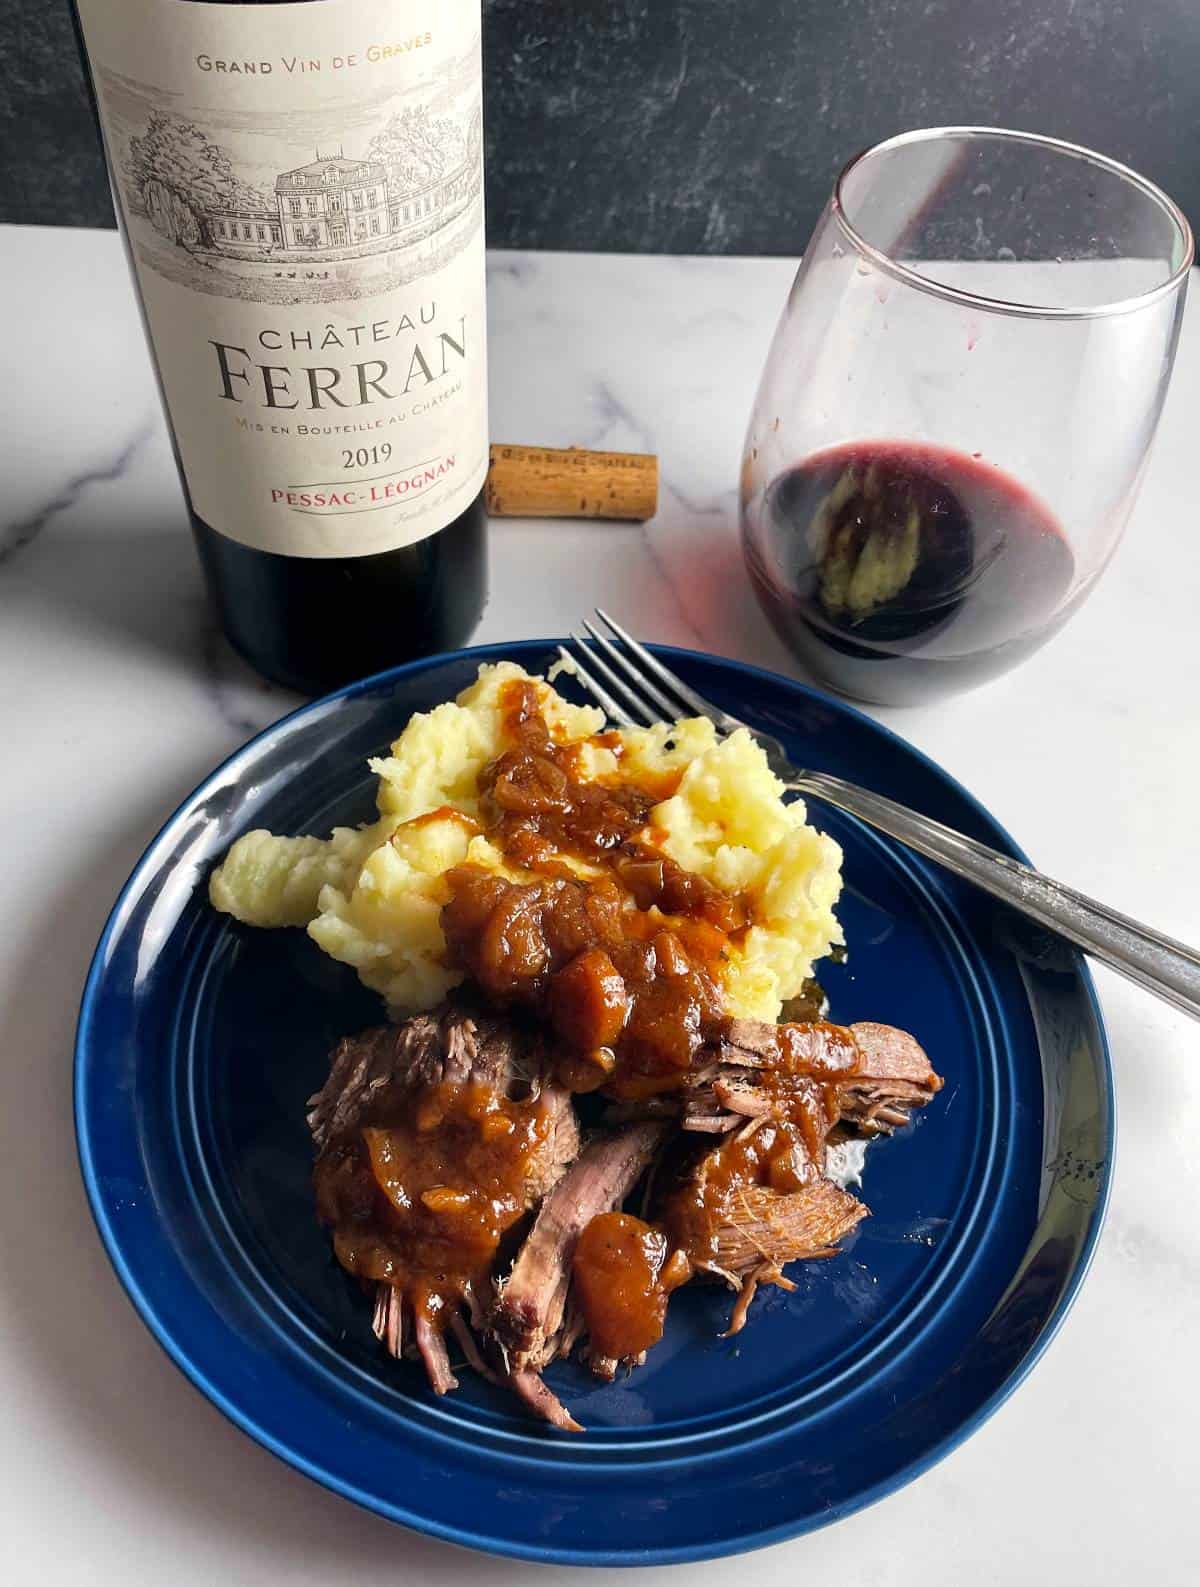 Braised brisket served with mashed potatoes on a blue plate, with Pessac-Léognan red wine in the background.